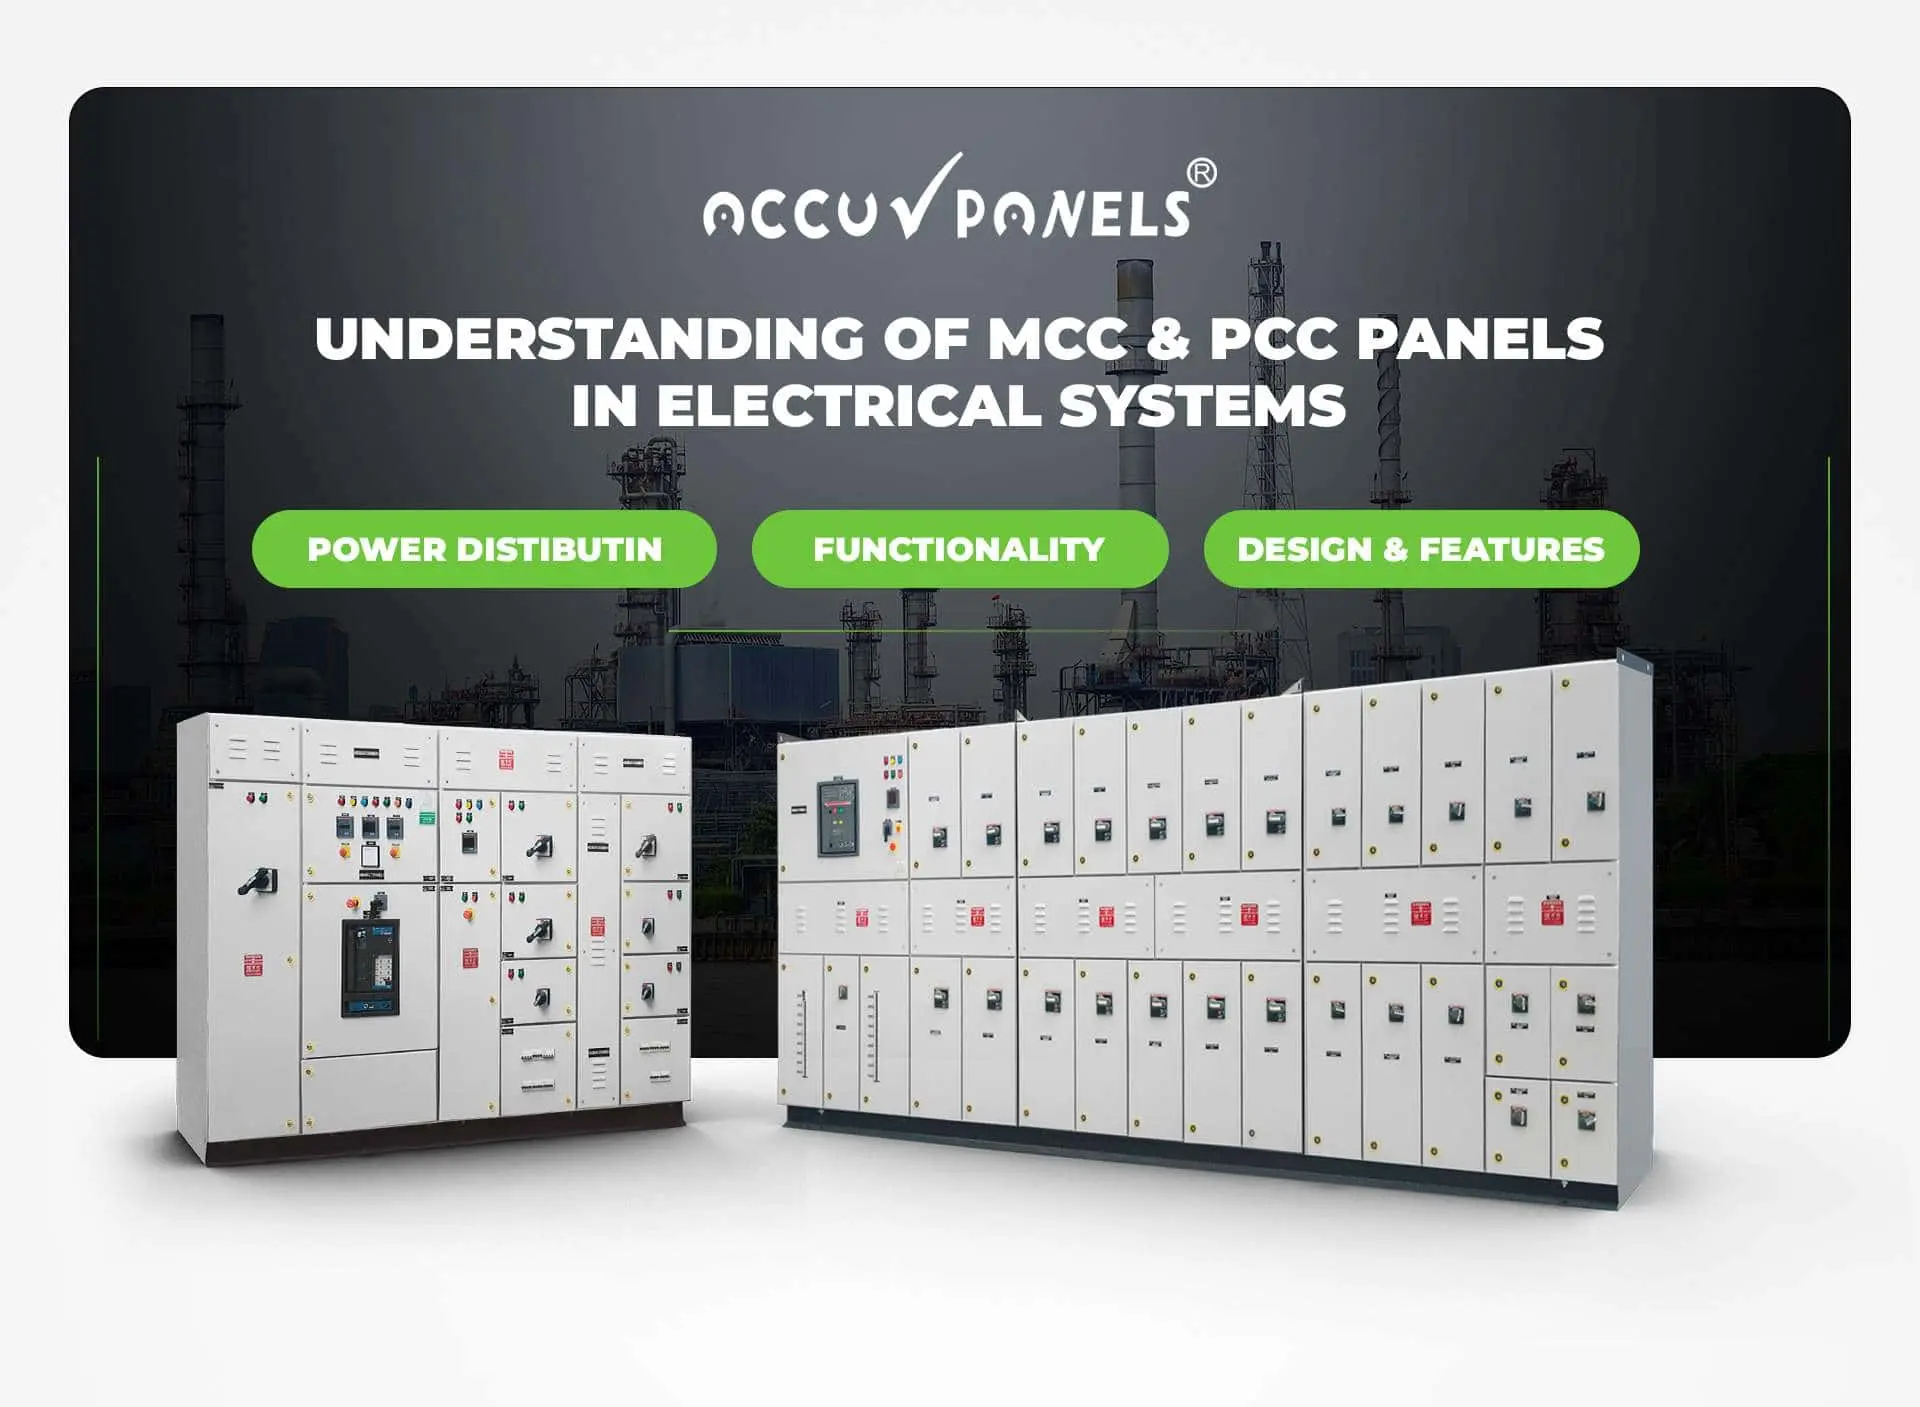 What is MCC and PCC Panels?